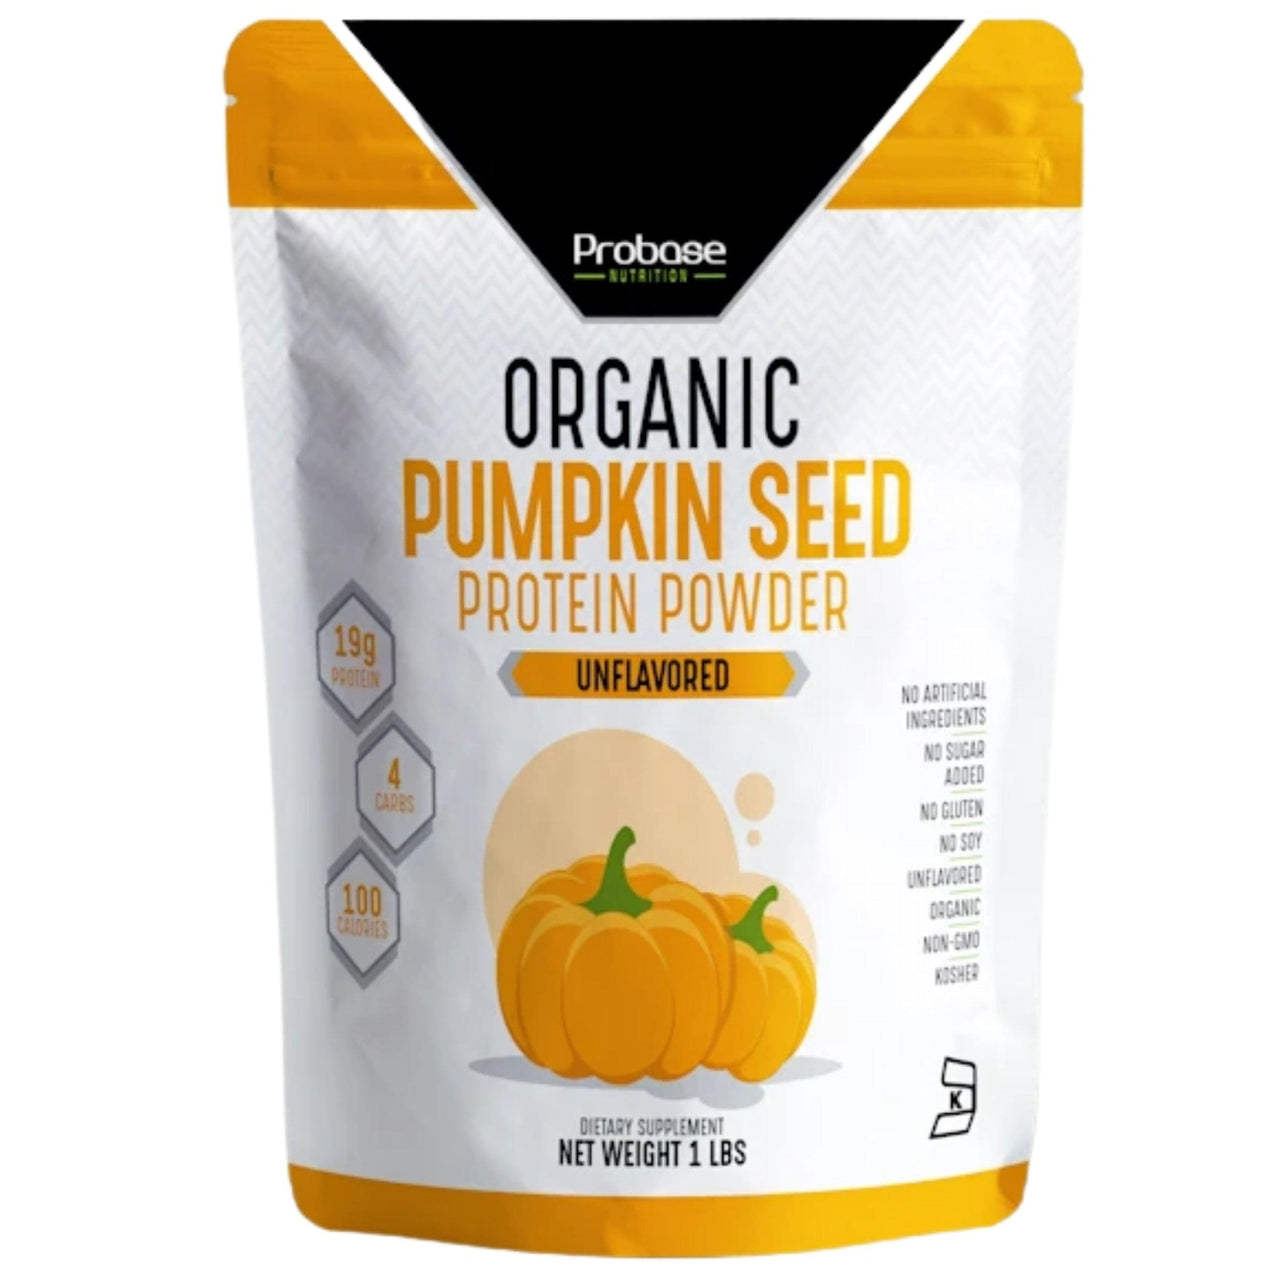 Organic Pumpkin Seed Protein (1 Pound) - Unflavored - Probase Nutrition